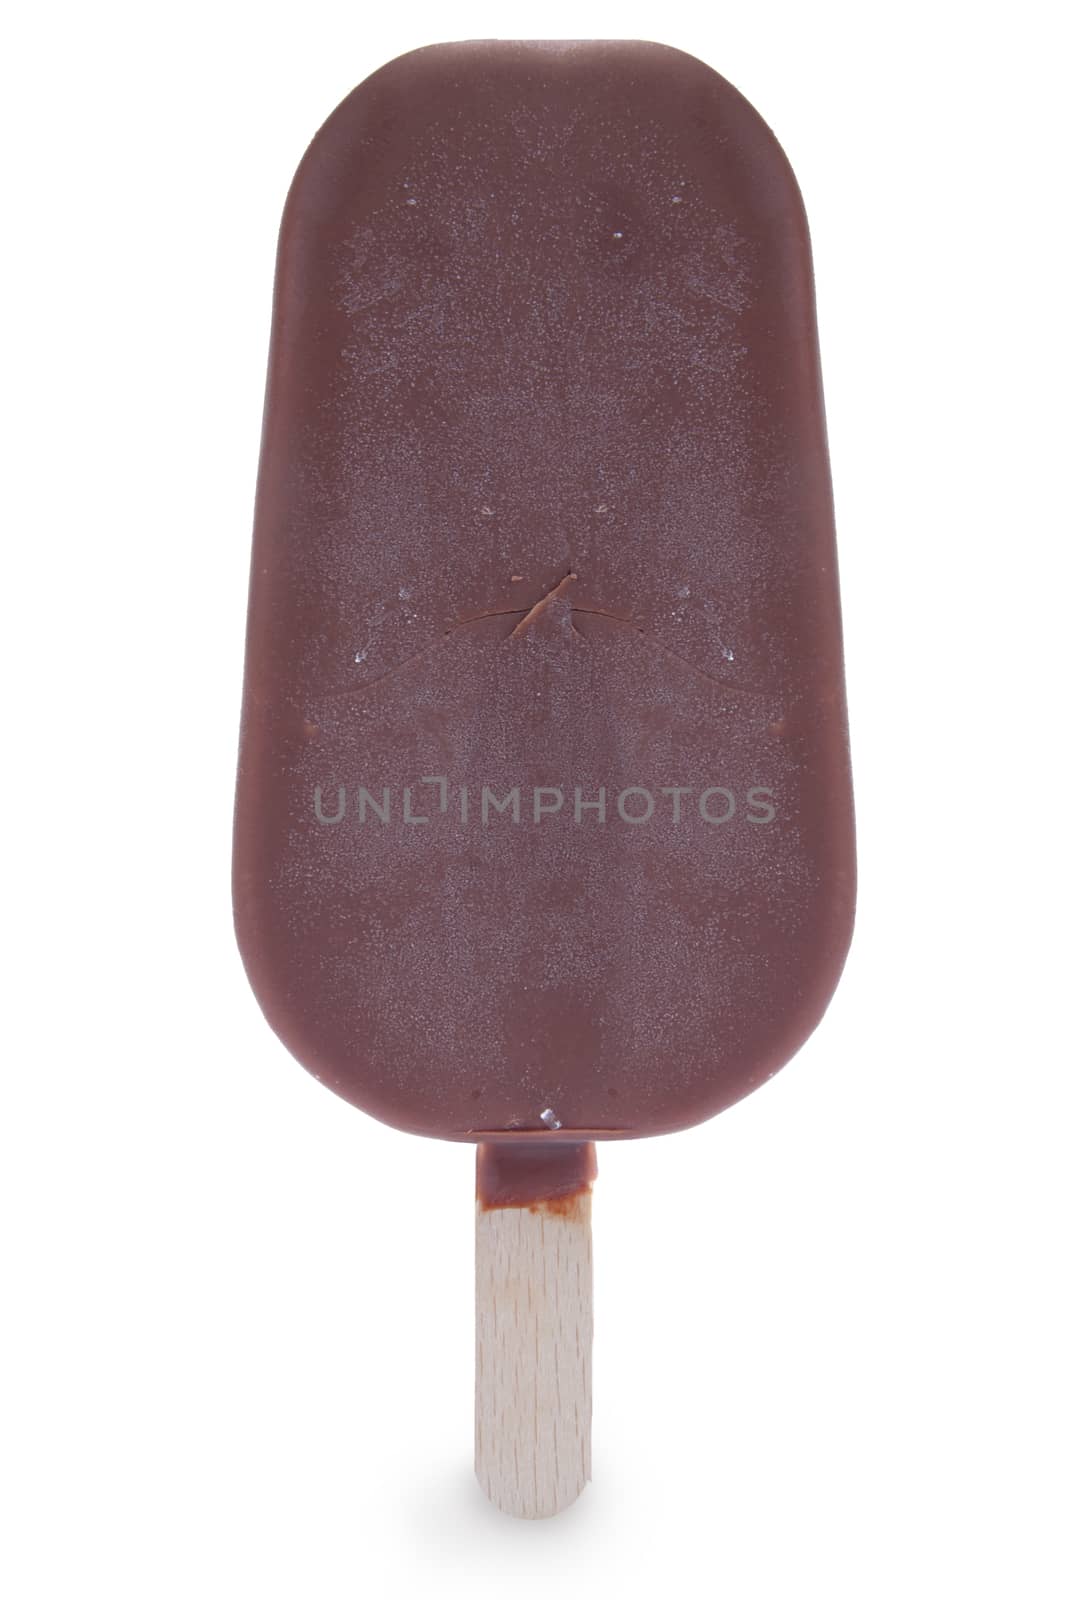 Frozen chocolate ice lolly on a white background